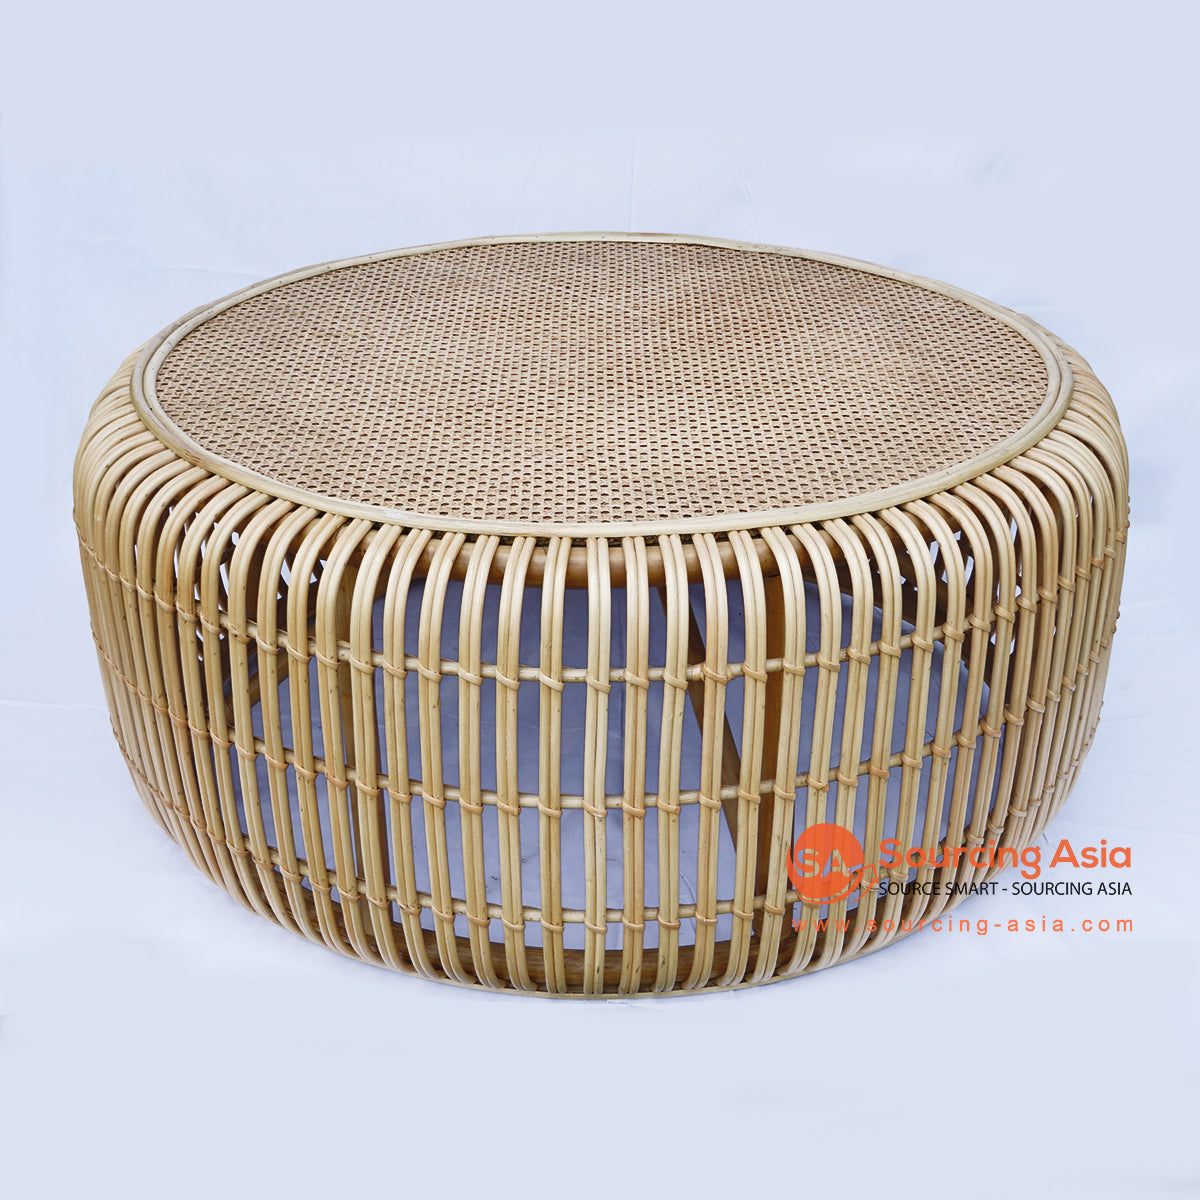 Bntc005 Natural Rattan Round Coffee Table Sourcing Asia